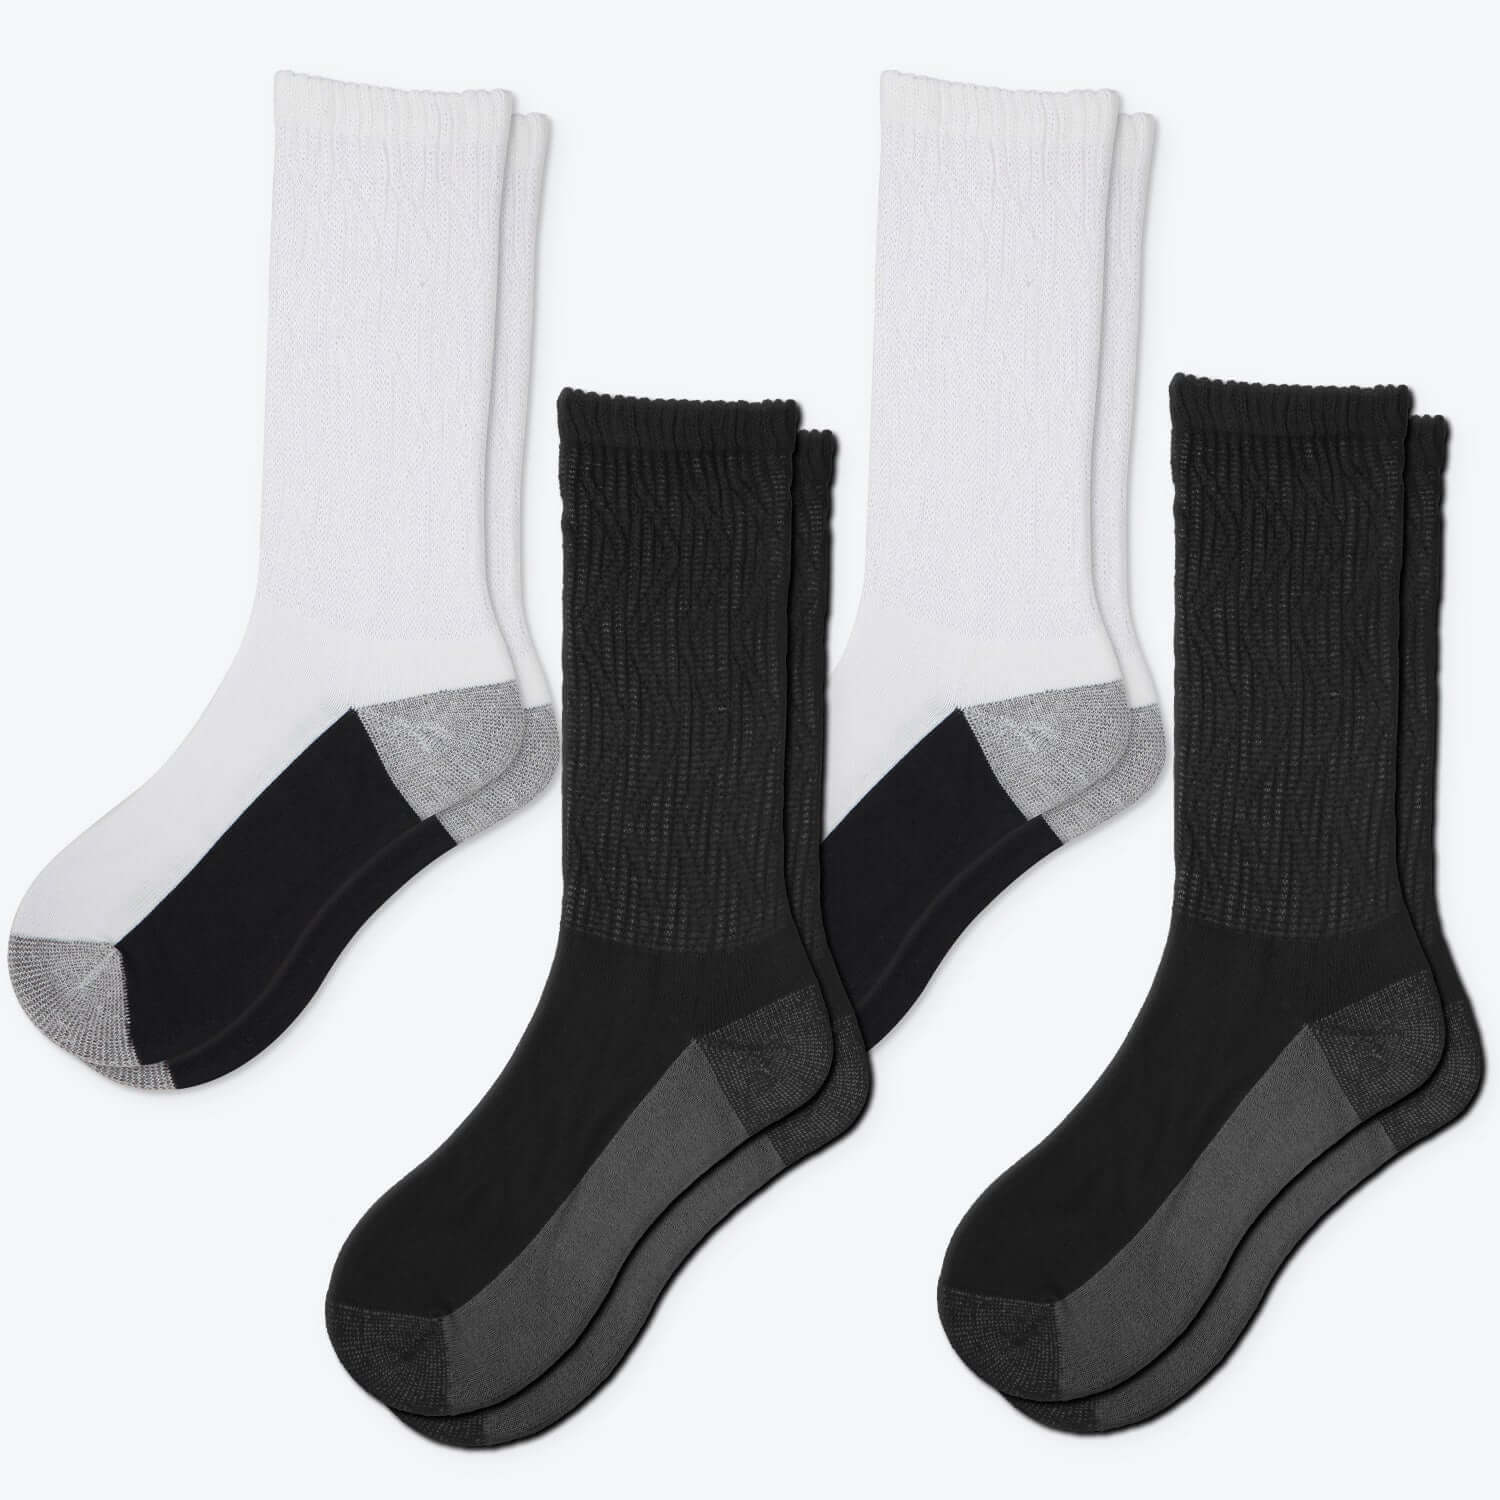 Bamboo Crew Diabetic Socks with Seamless Toe, Extra Firm, 4 Pairs - md-diab